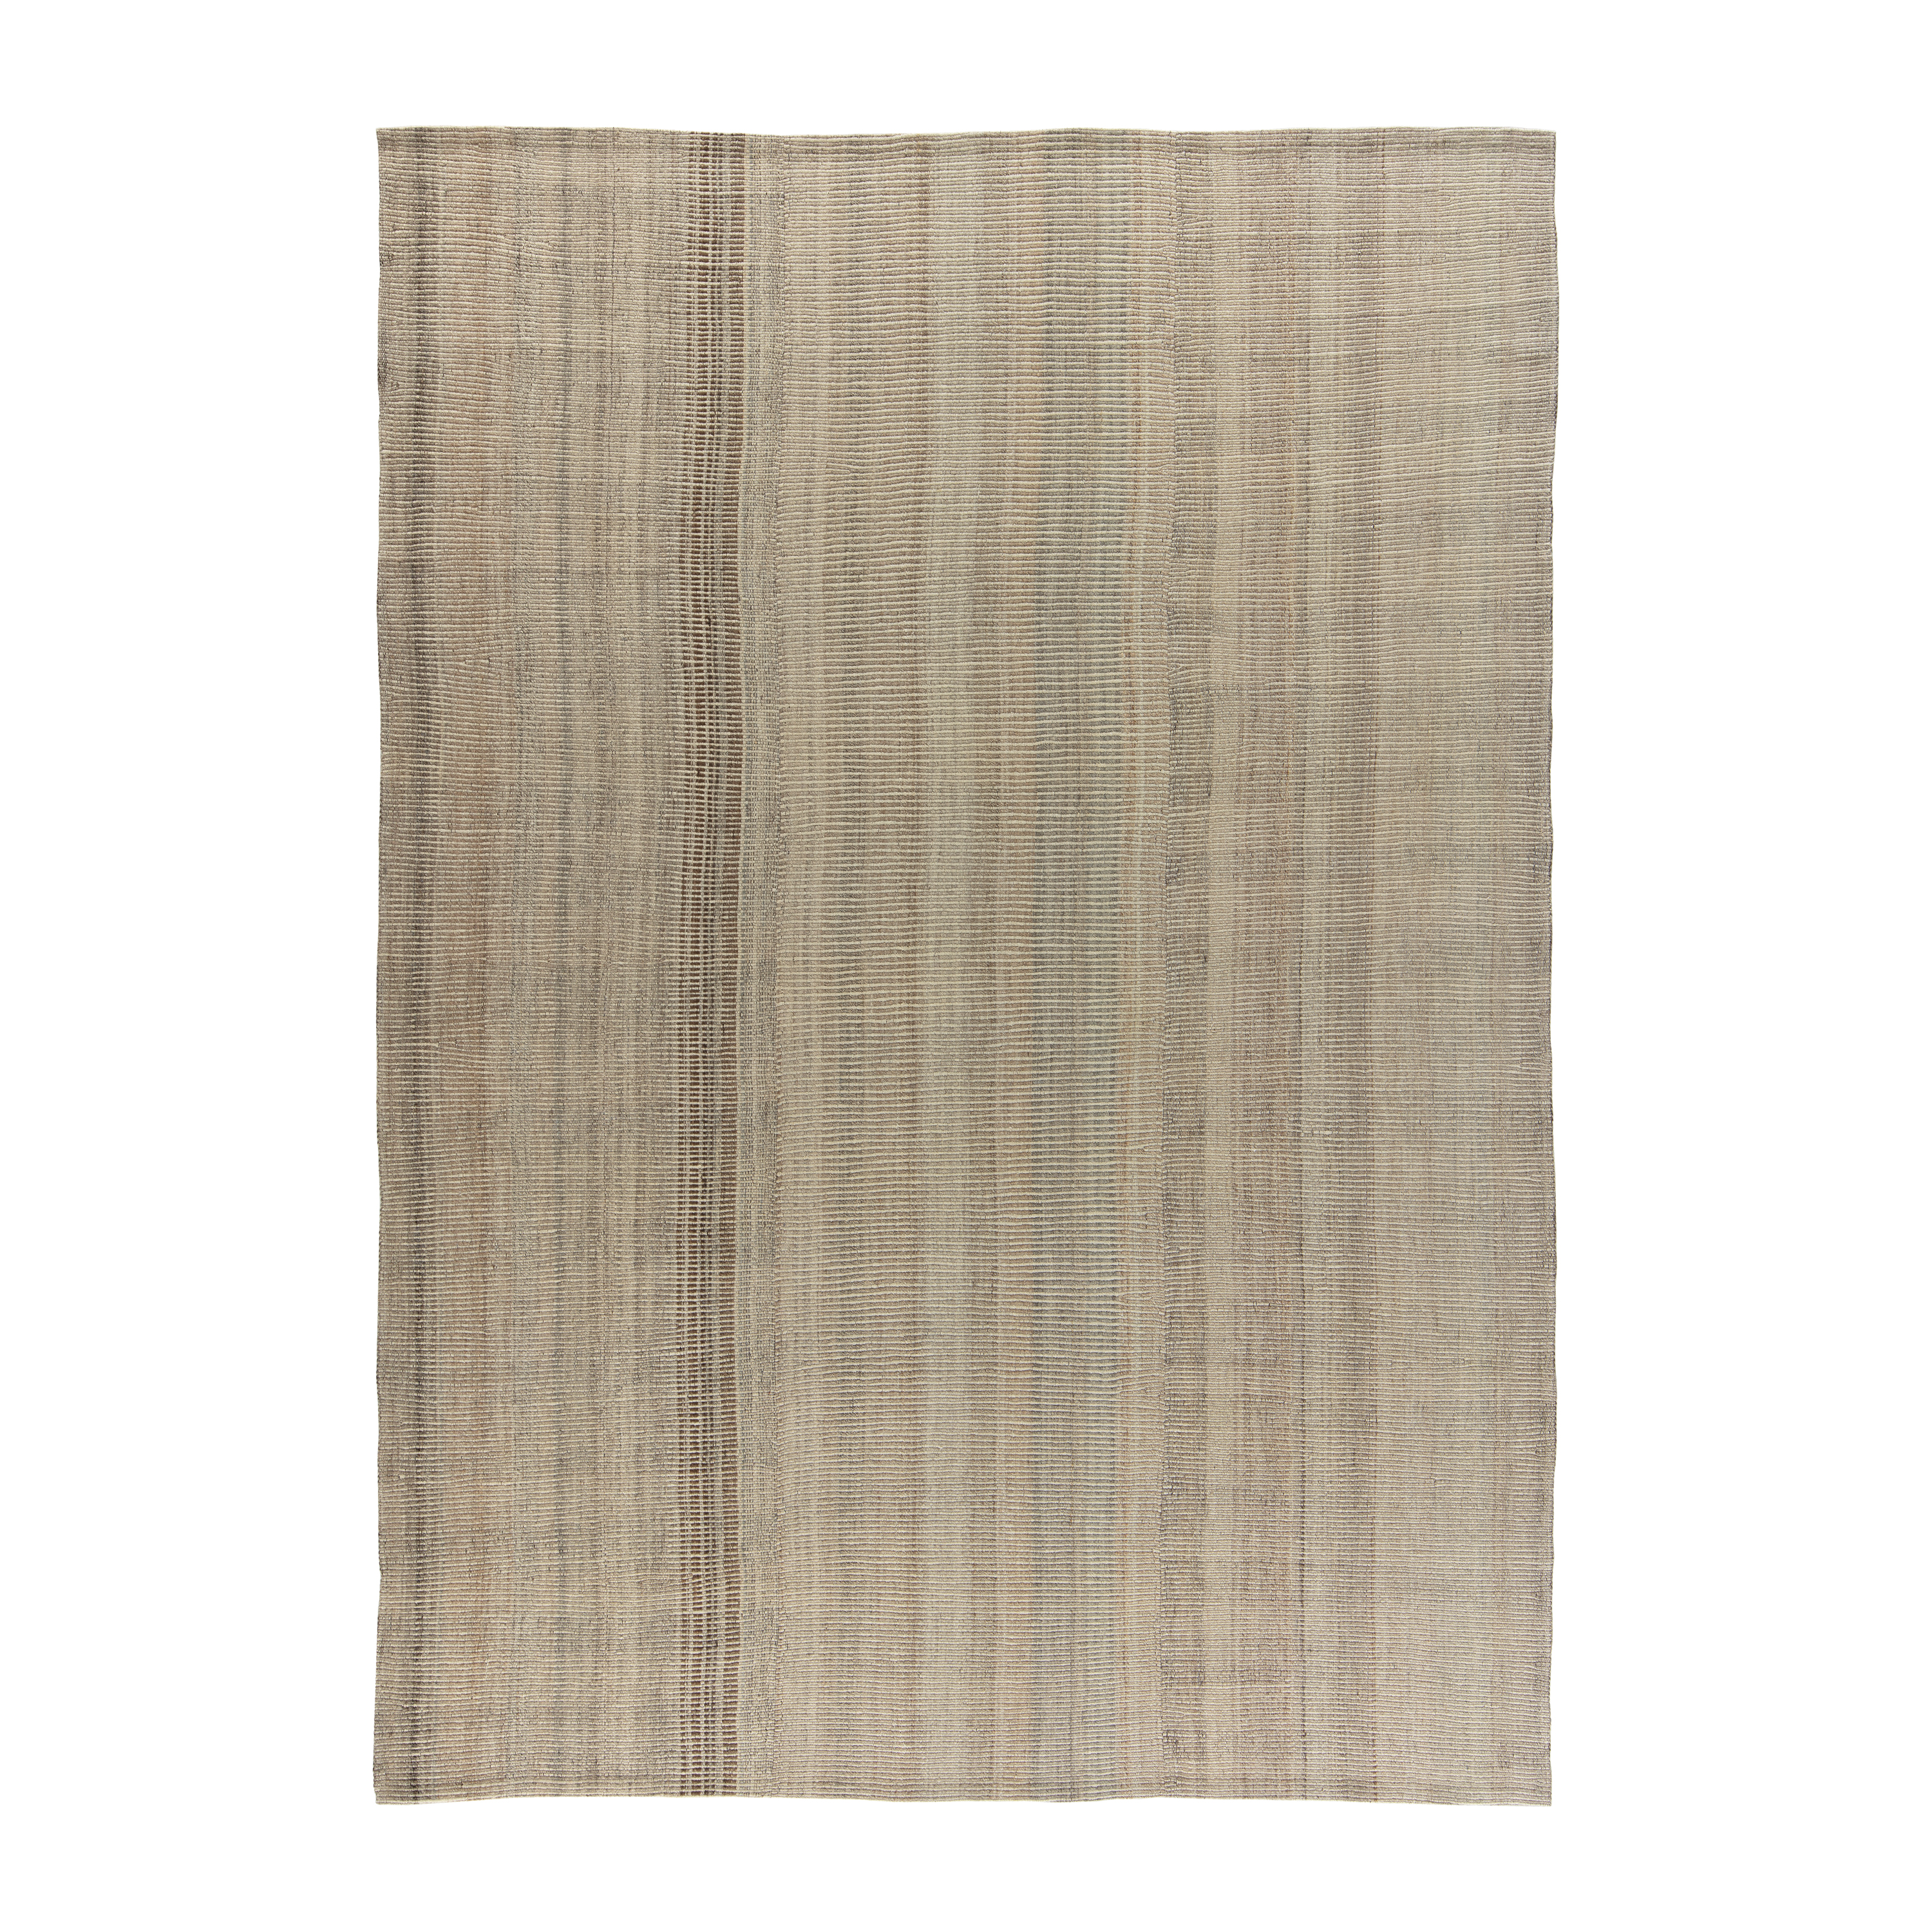 This Pelas Charmo flatweave rug is made with handspun wool and natural dyes. It is inspired by the Antique kilims that are native to the Kurdish region in Iran. 